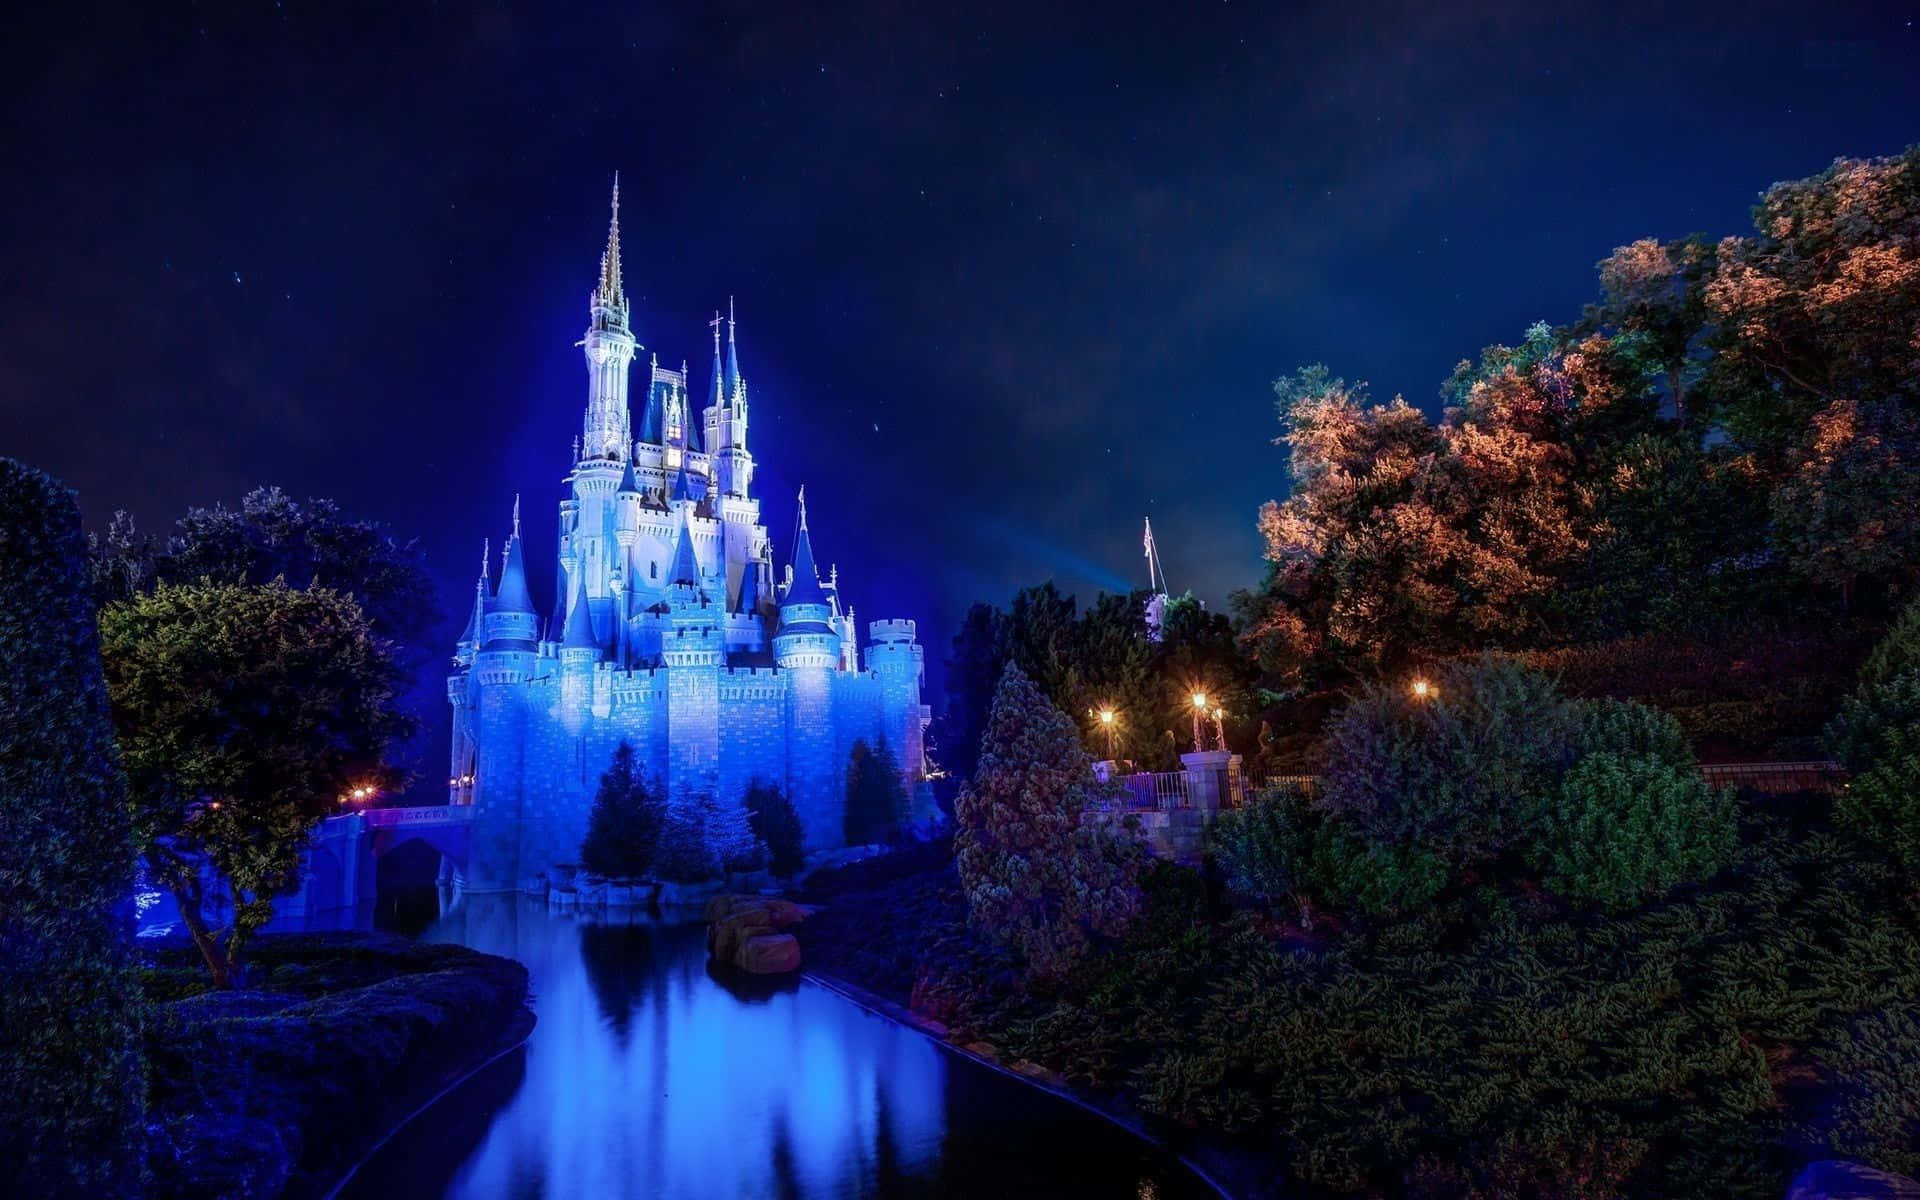 Take your work to a whole new level with this Aesthetic Disney Laptop Wallpaper